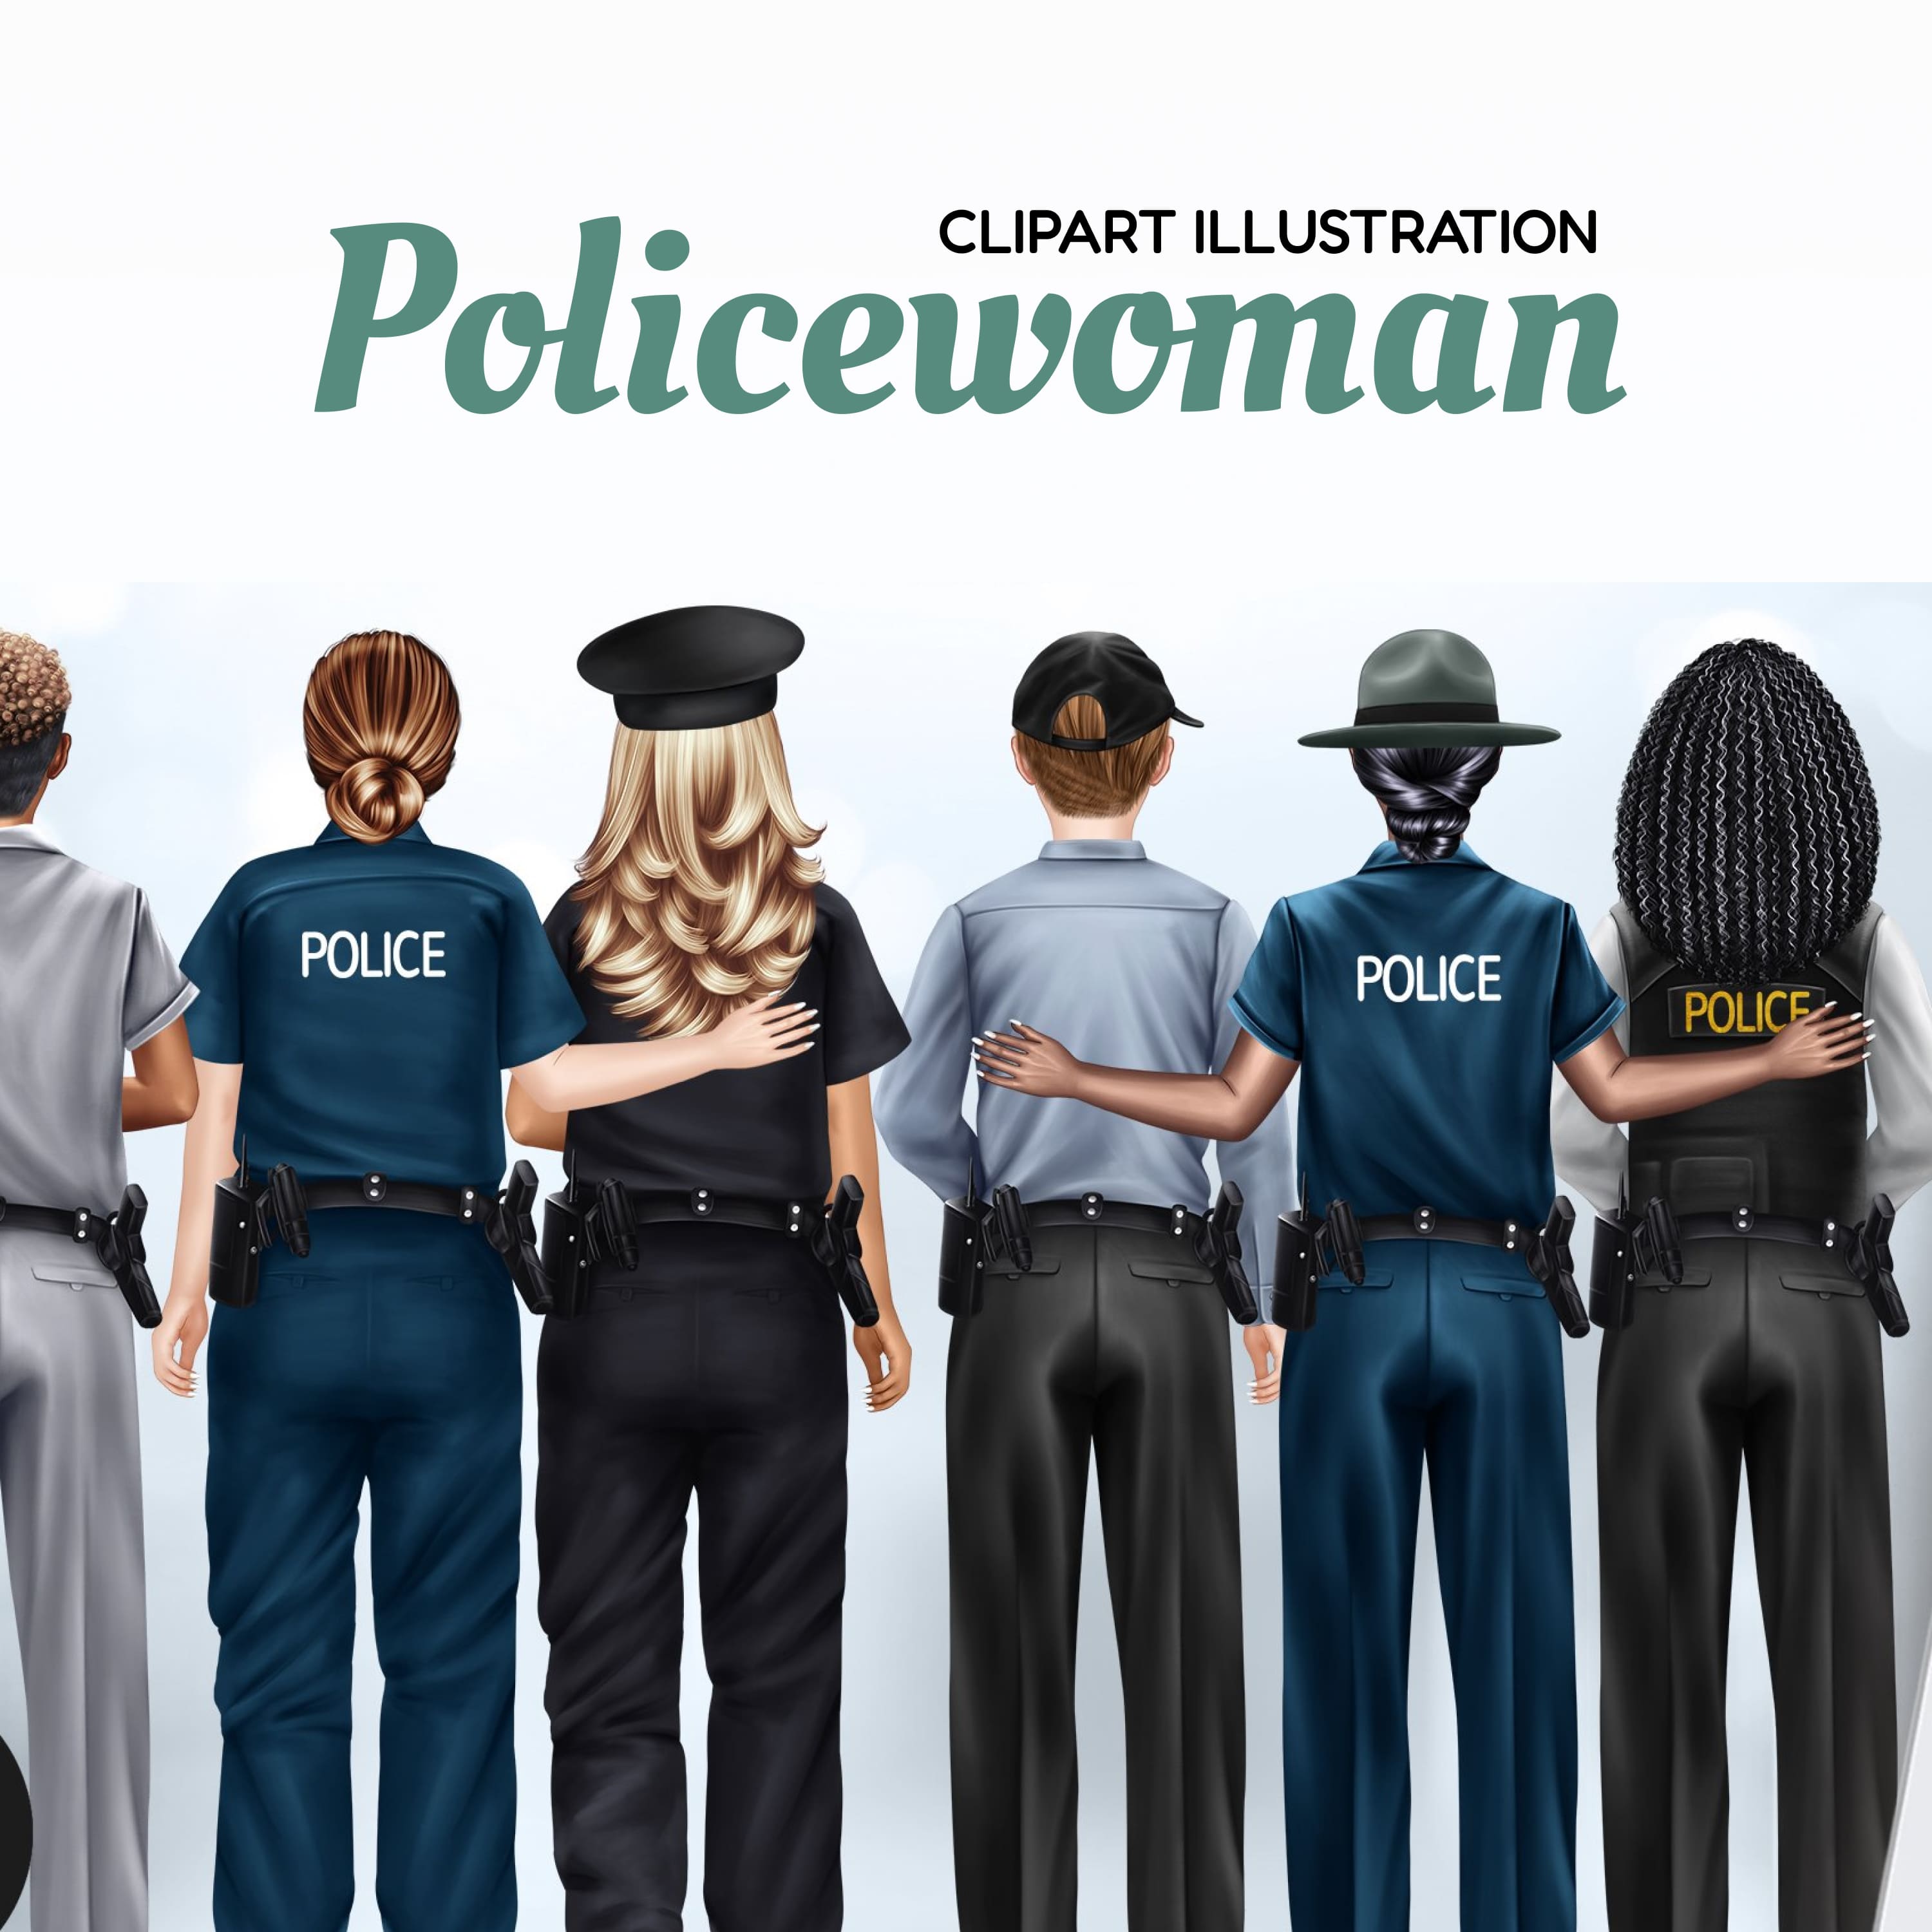 Policewoman Clip Art, Police Officers Clipart, Police PNG.